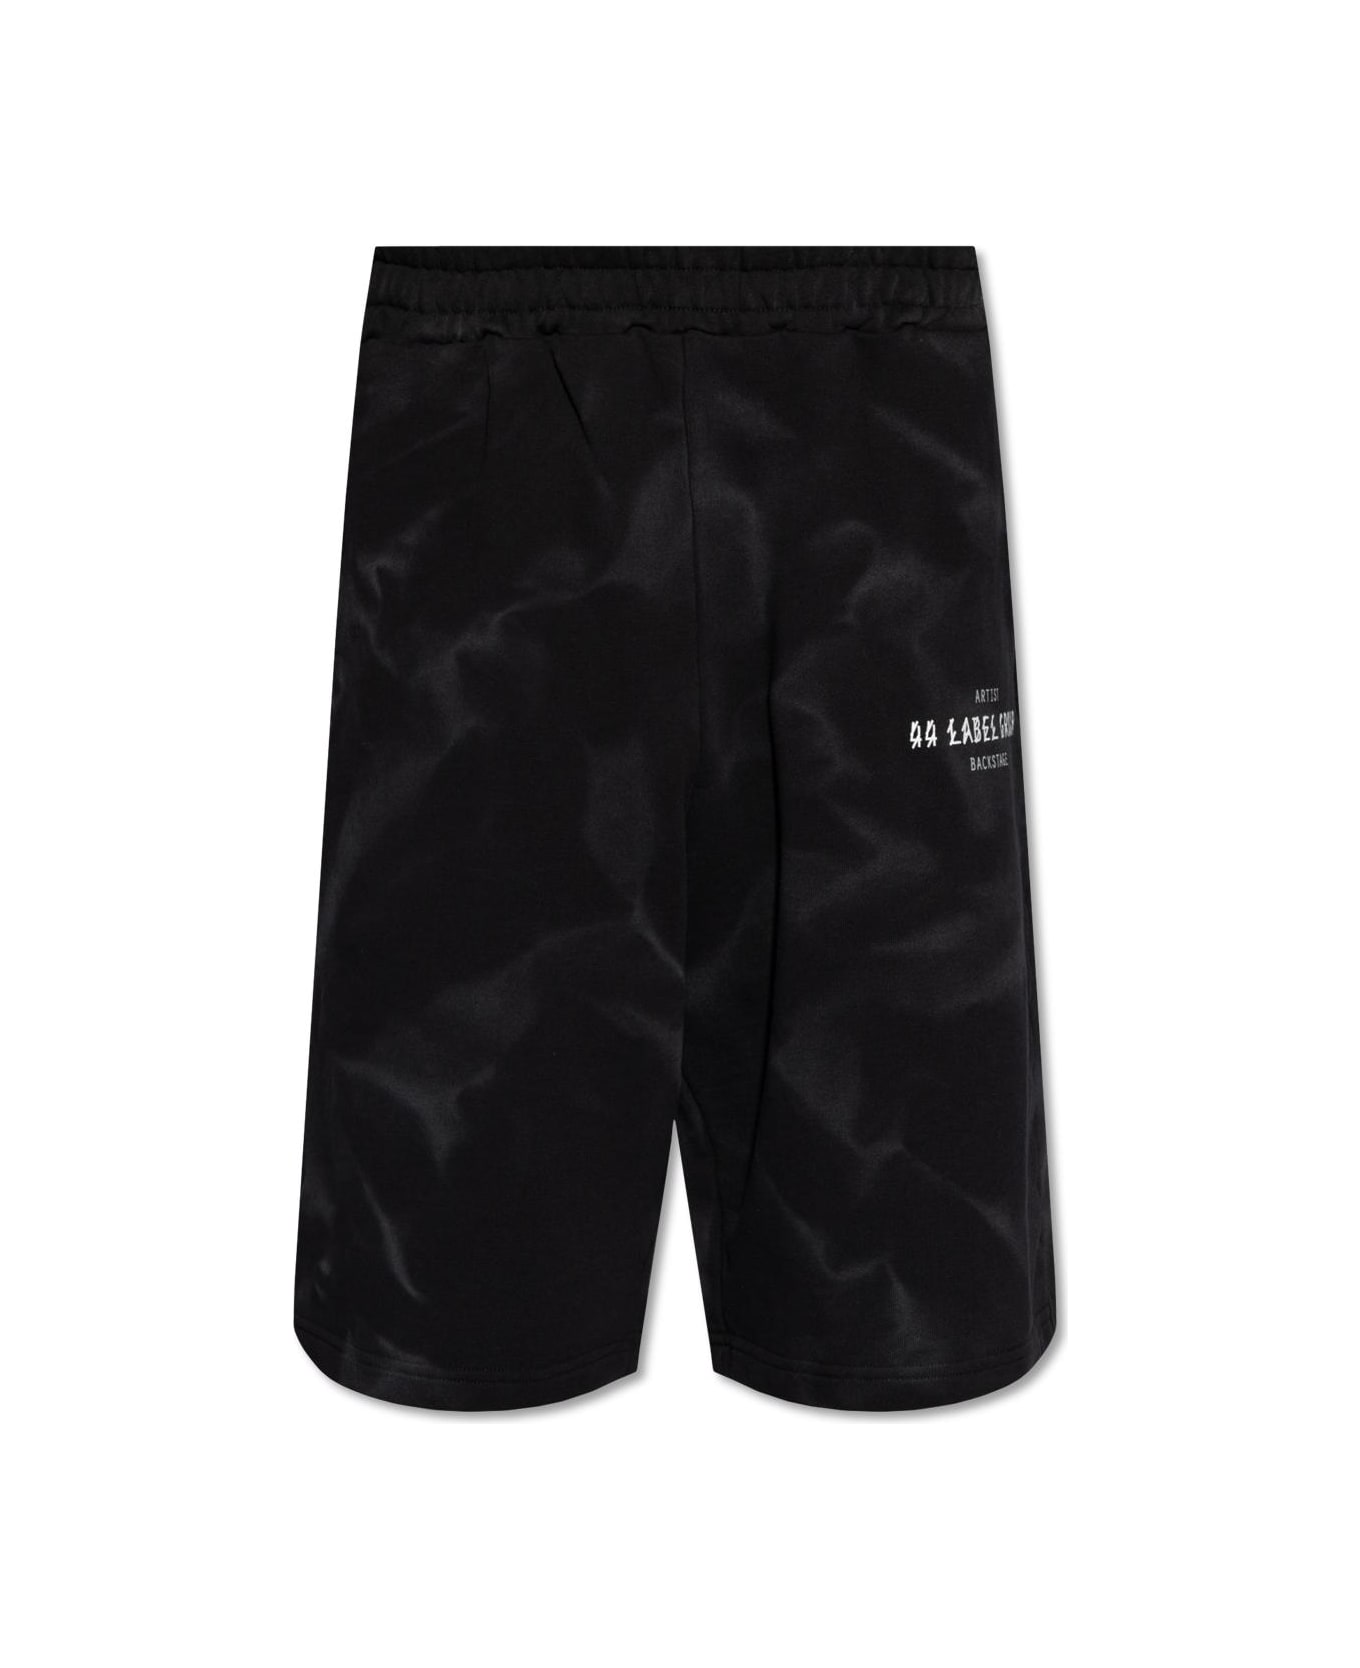 44 Label Group Cotton Shorts With Print - Black+effetto smoke